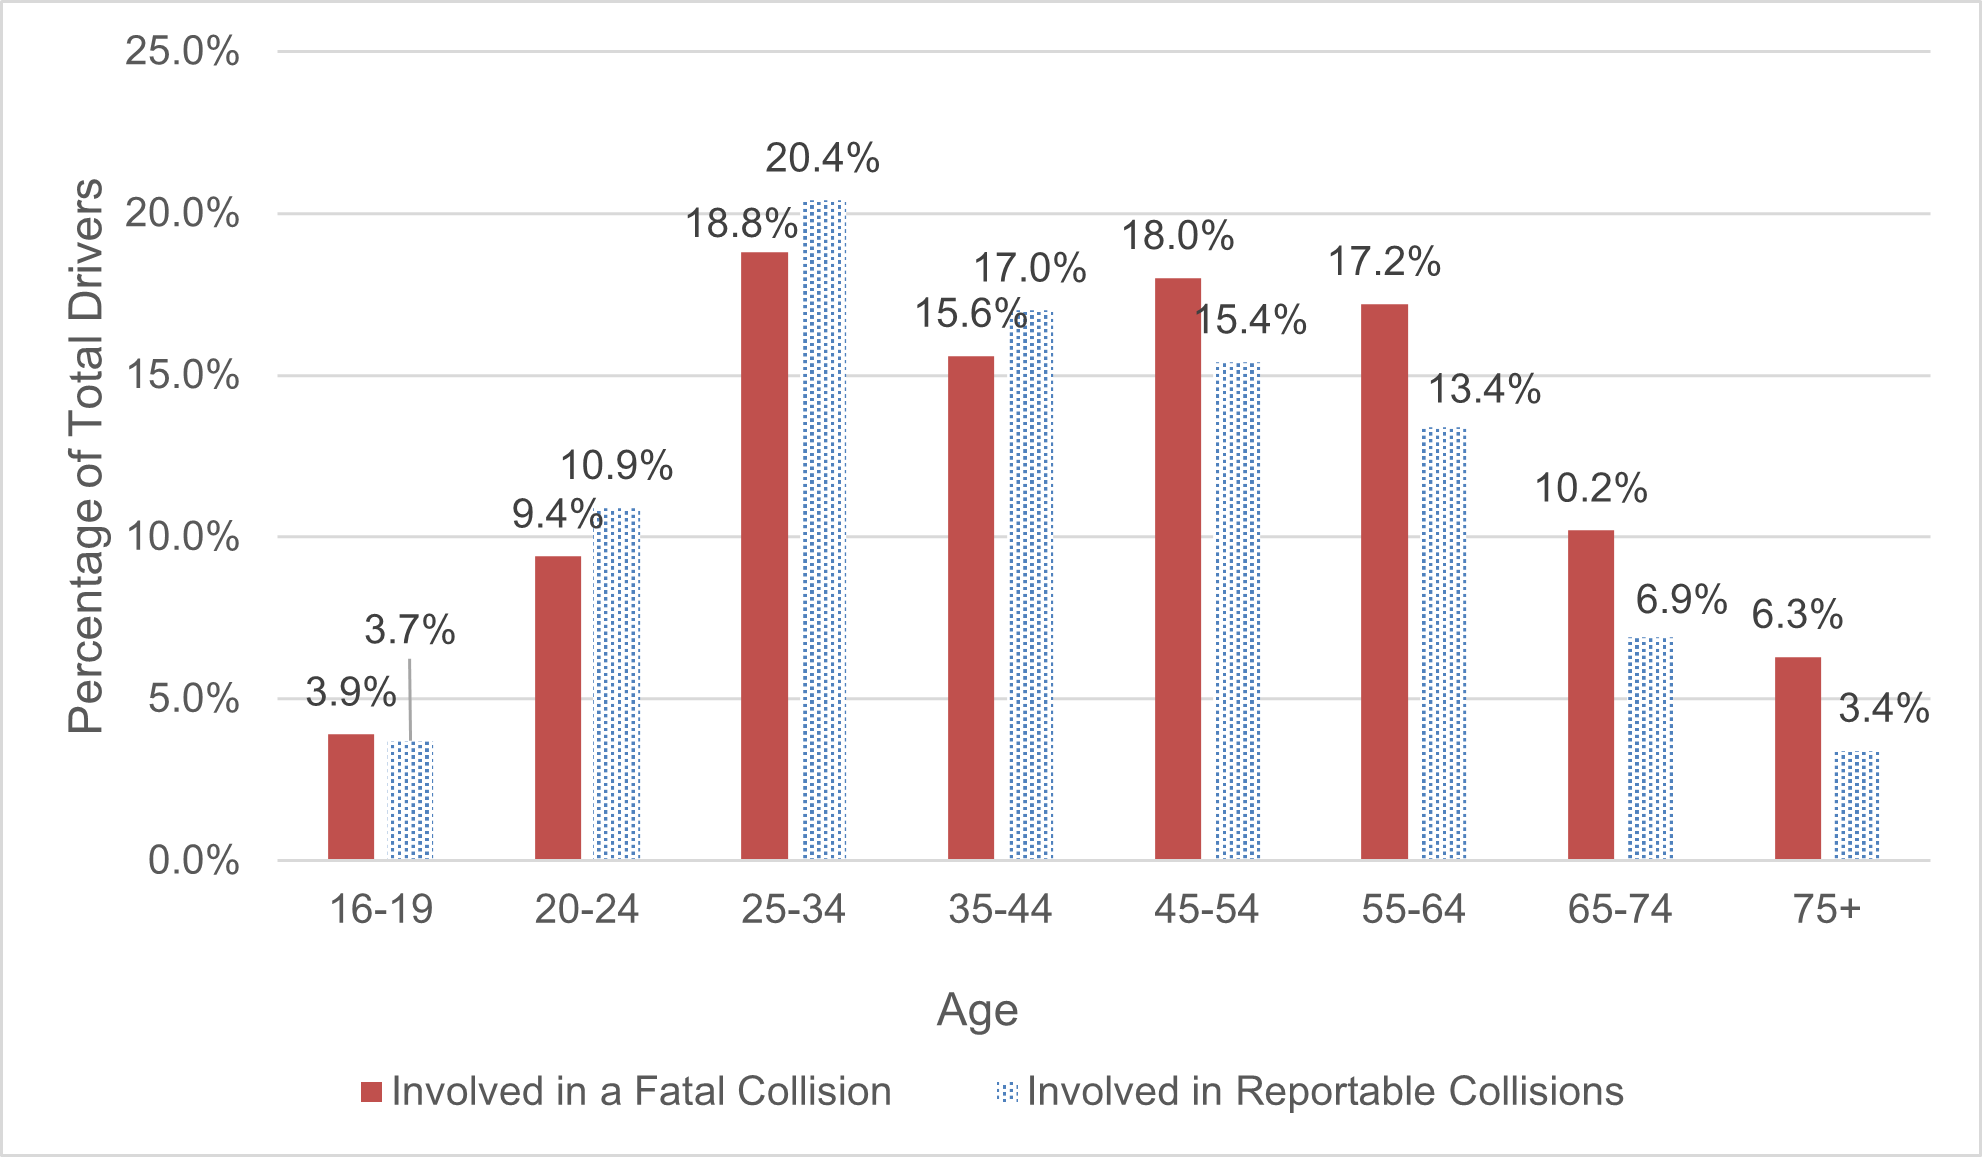 Figure 17 demonstrates the number drivers involved in fatal collisions and the number of drivers involved in reportable collisions according to age category.